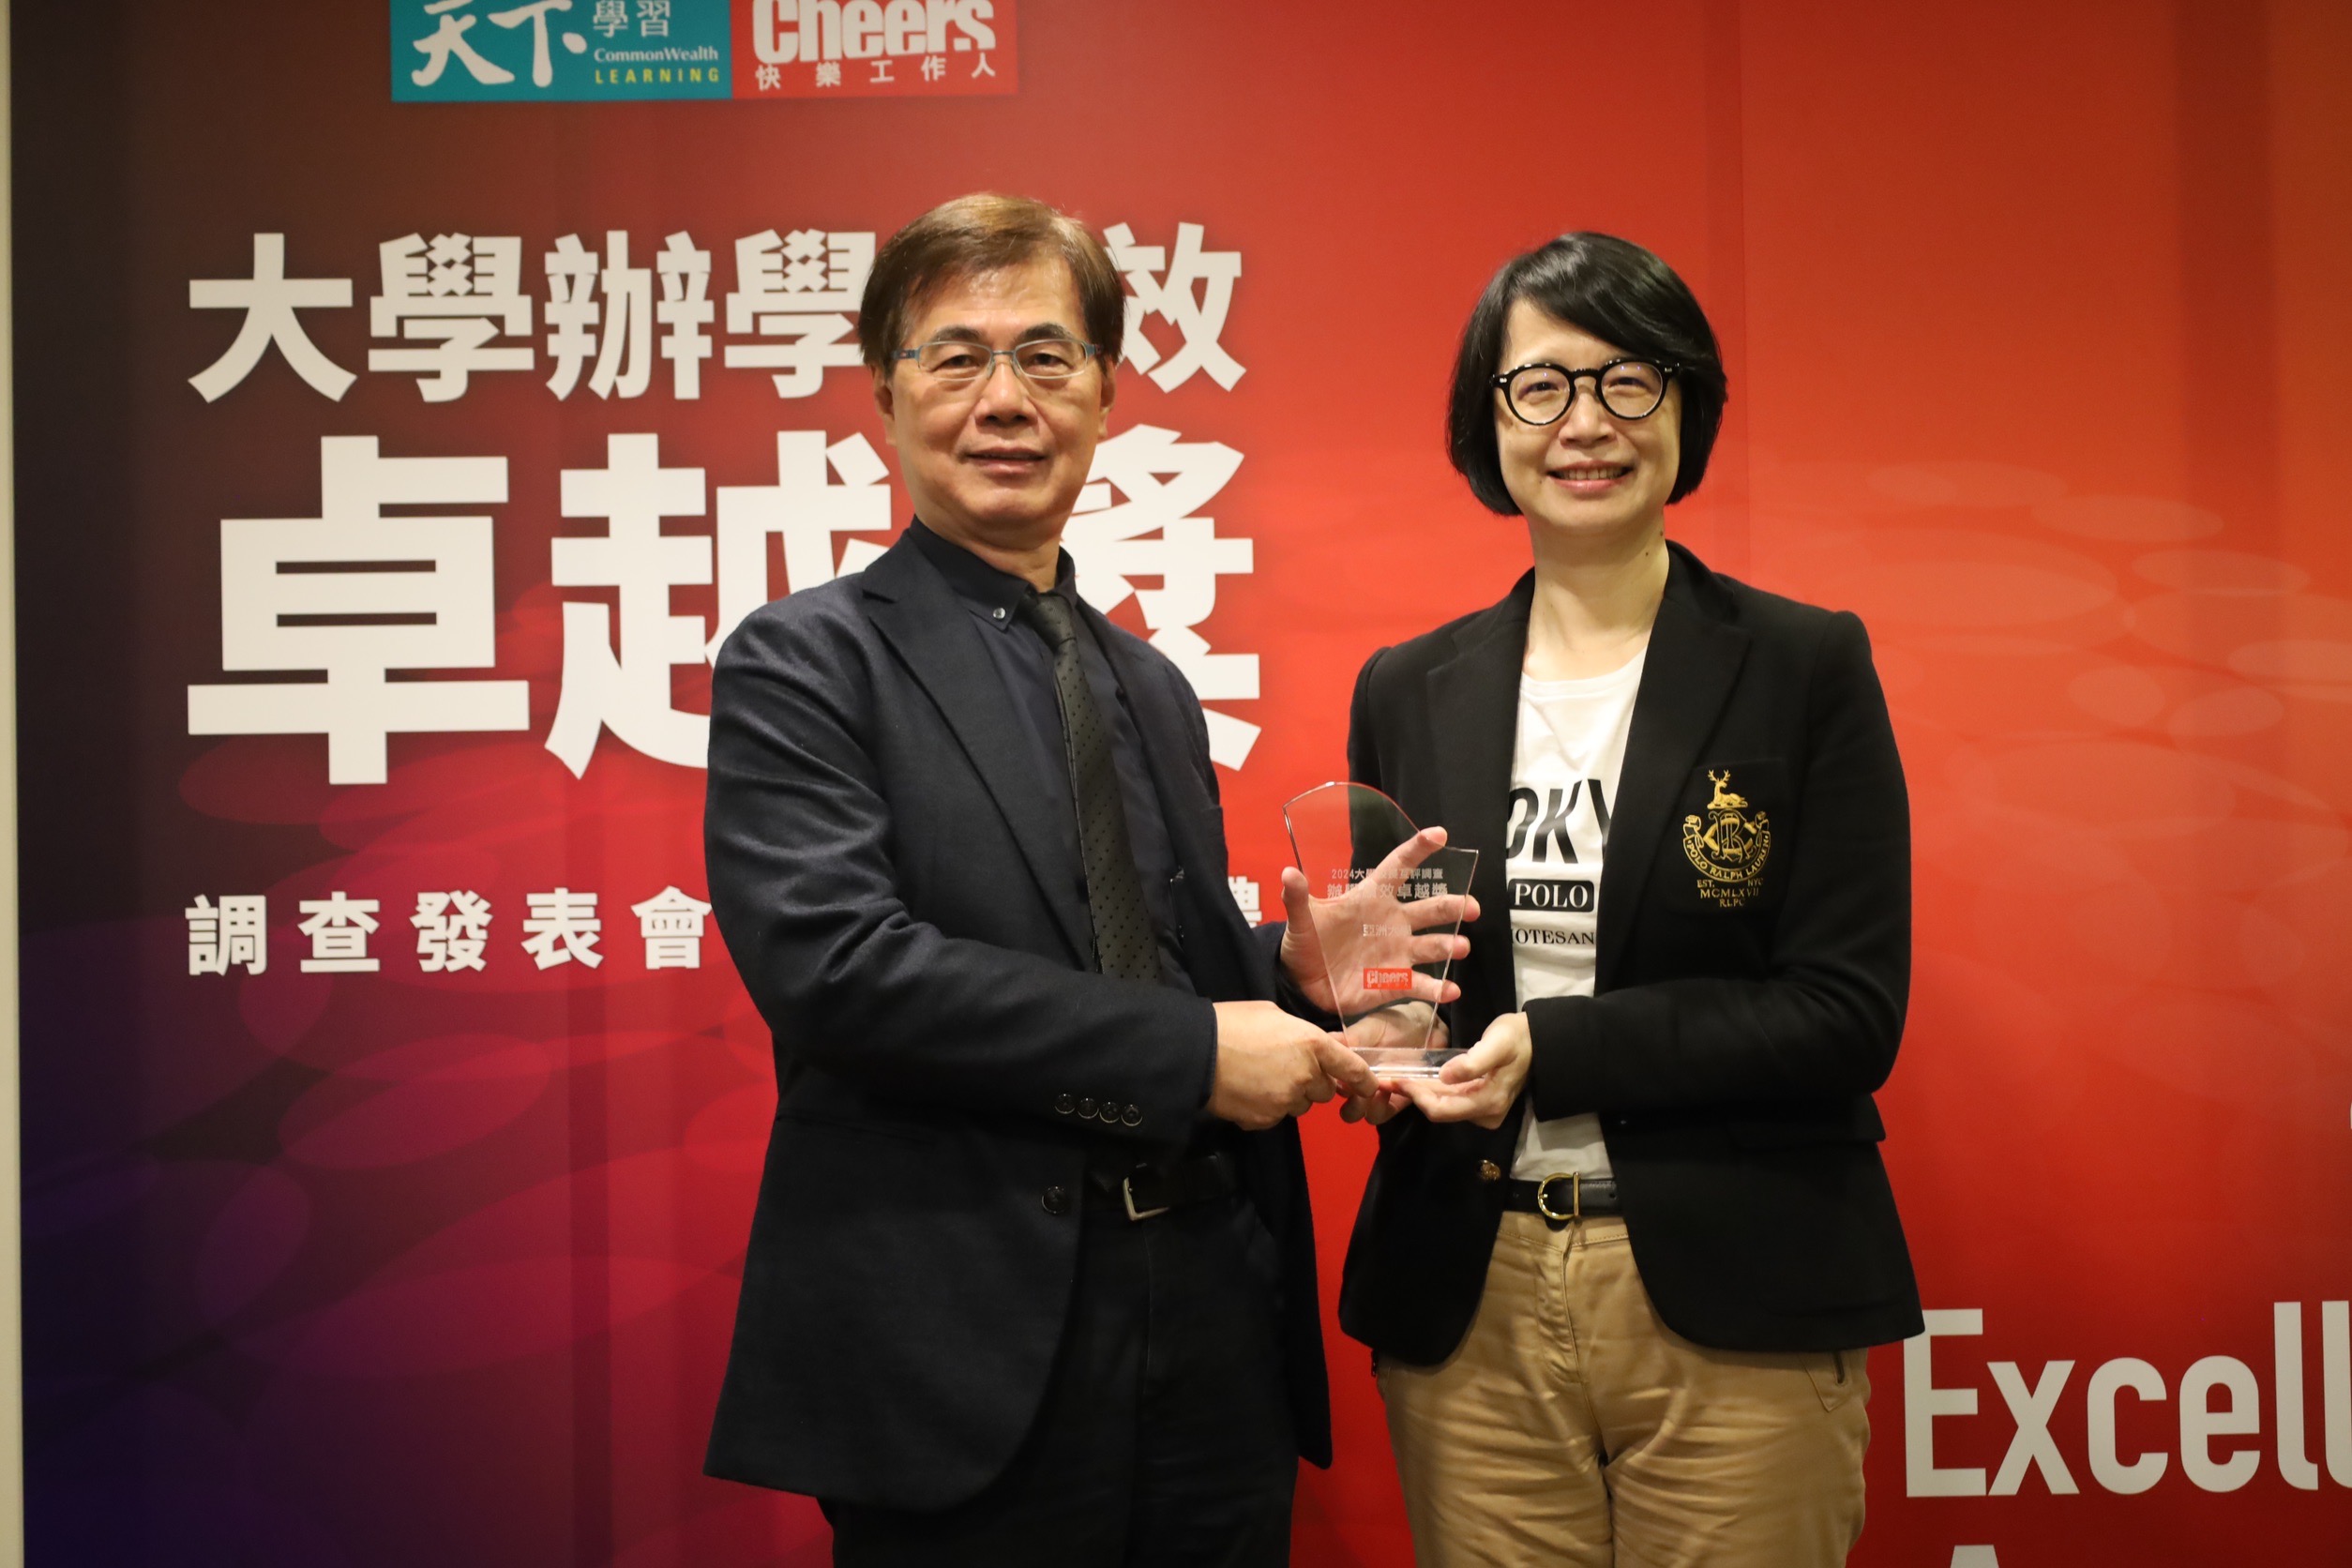 The general manager of the Business Group of Cheers Magazine, Feng-Zhen Liu (right), presented the award to the vice president of Asia University, Cheng-Lein Teng